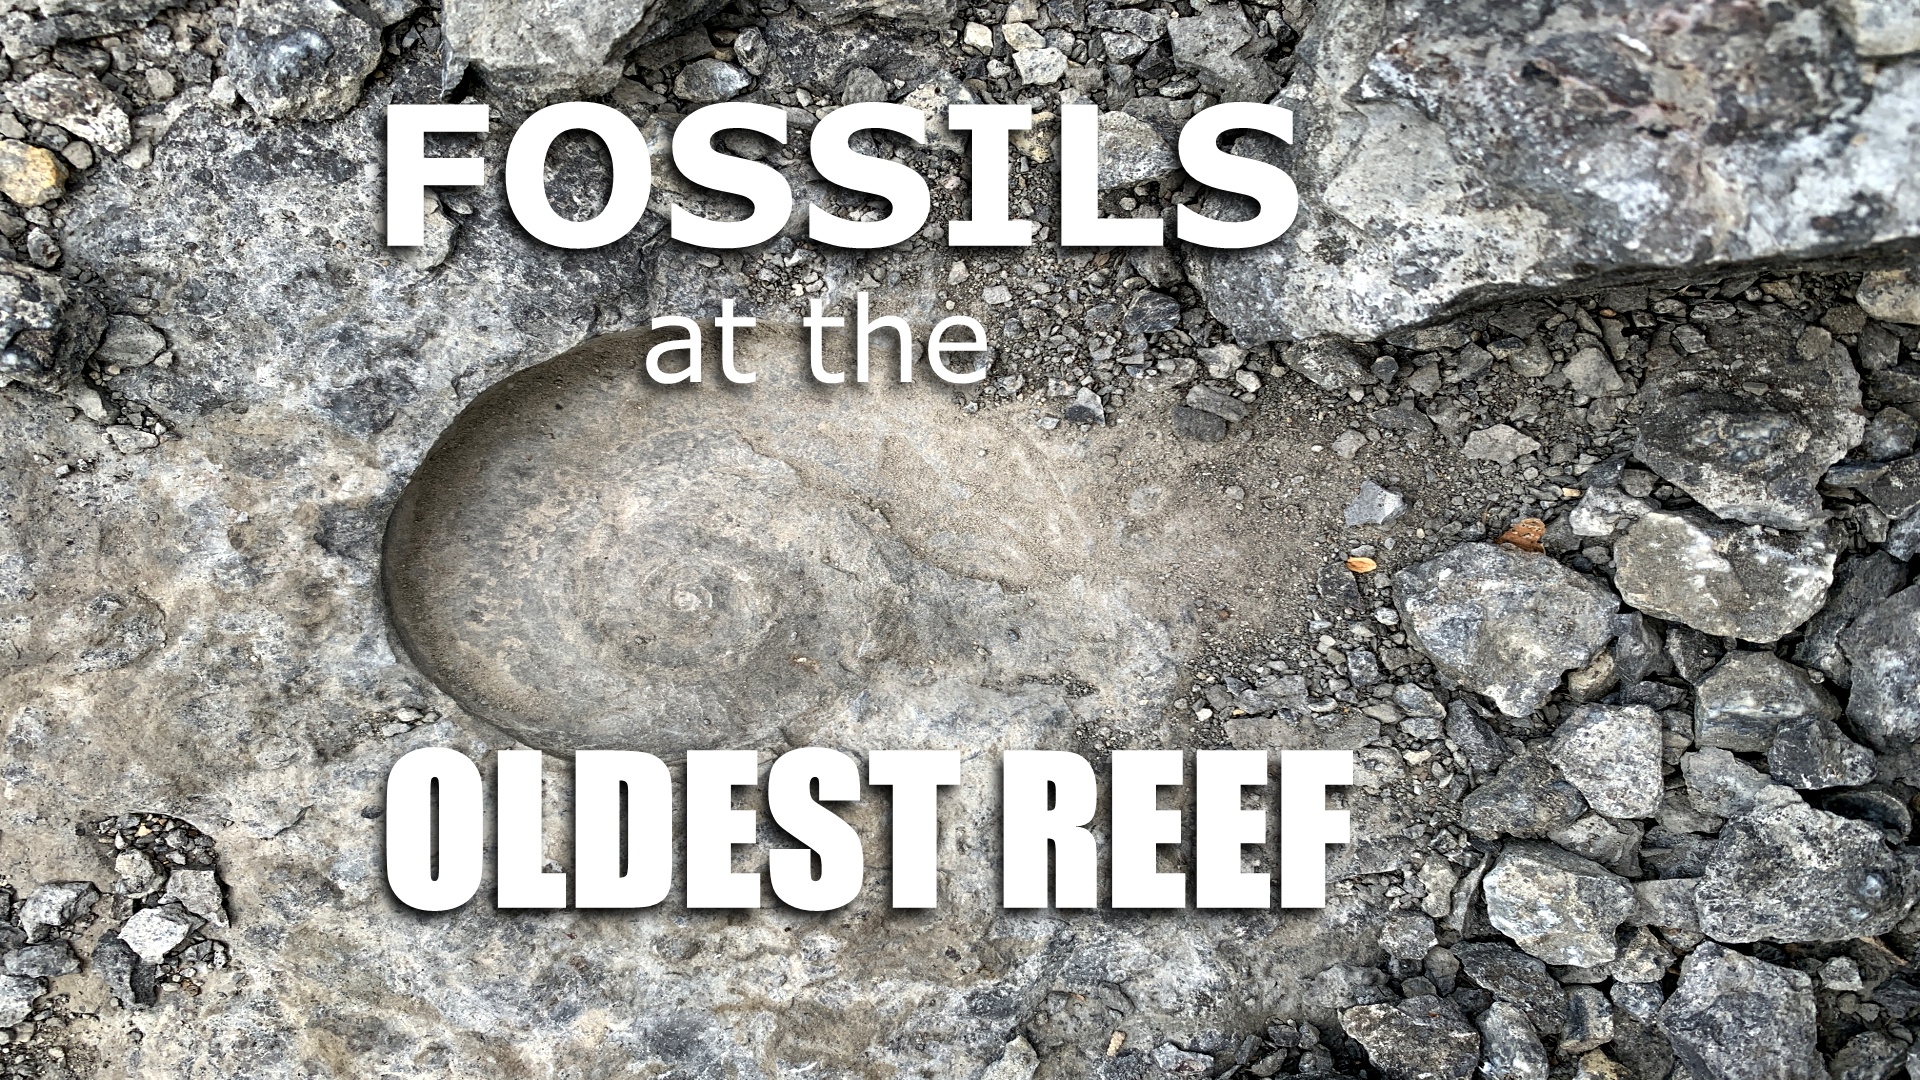 Fantastic Fossils at the Oldest Reef on Earth